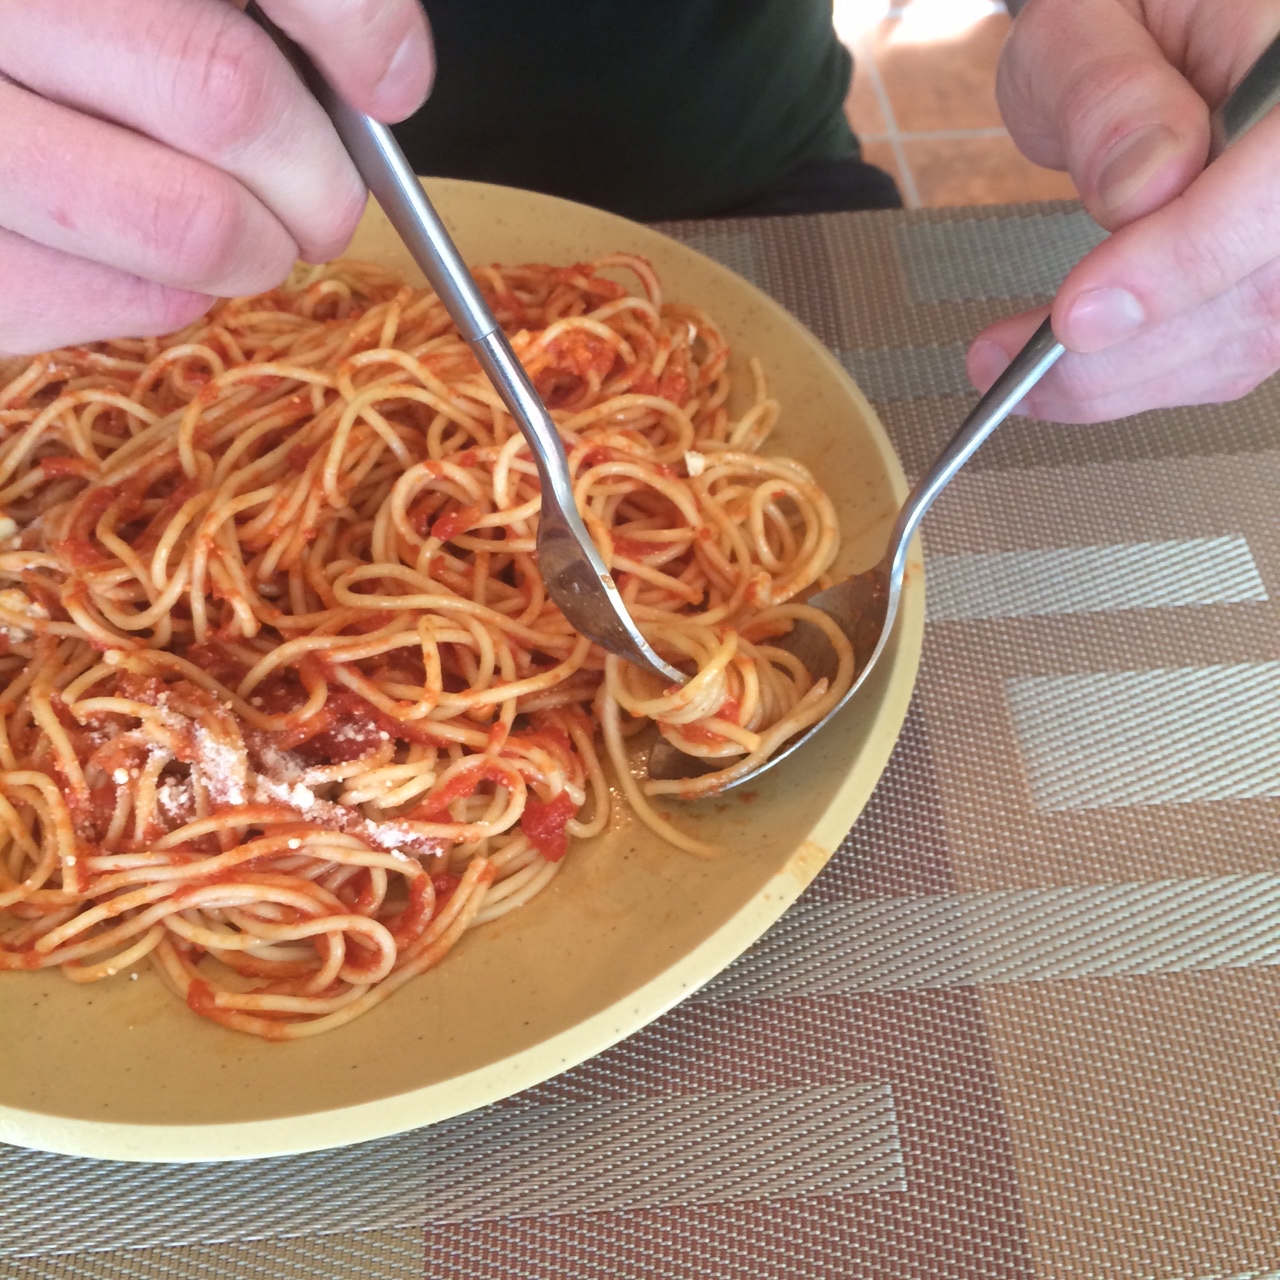 Using a spoon to put spaghetti on a fork